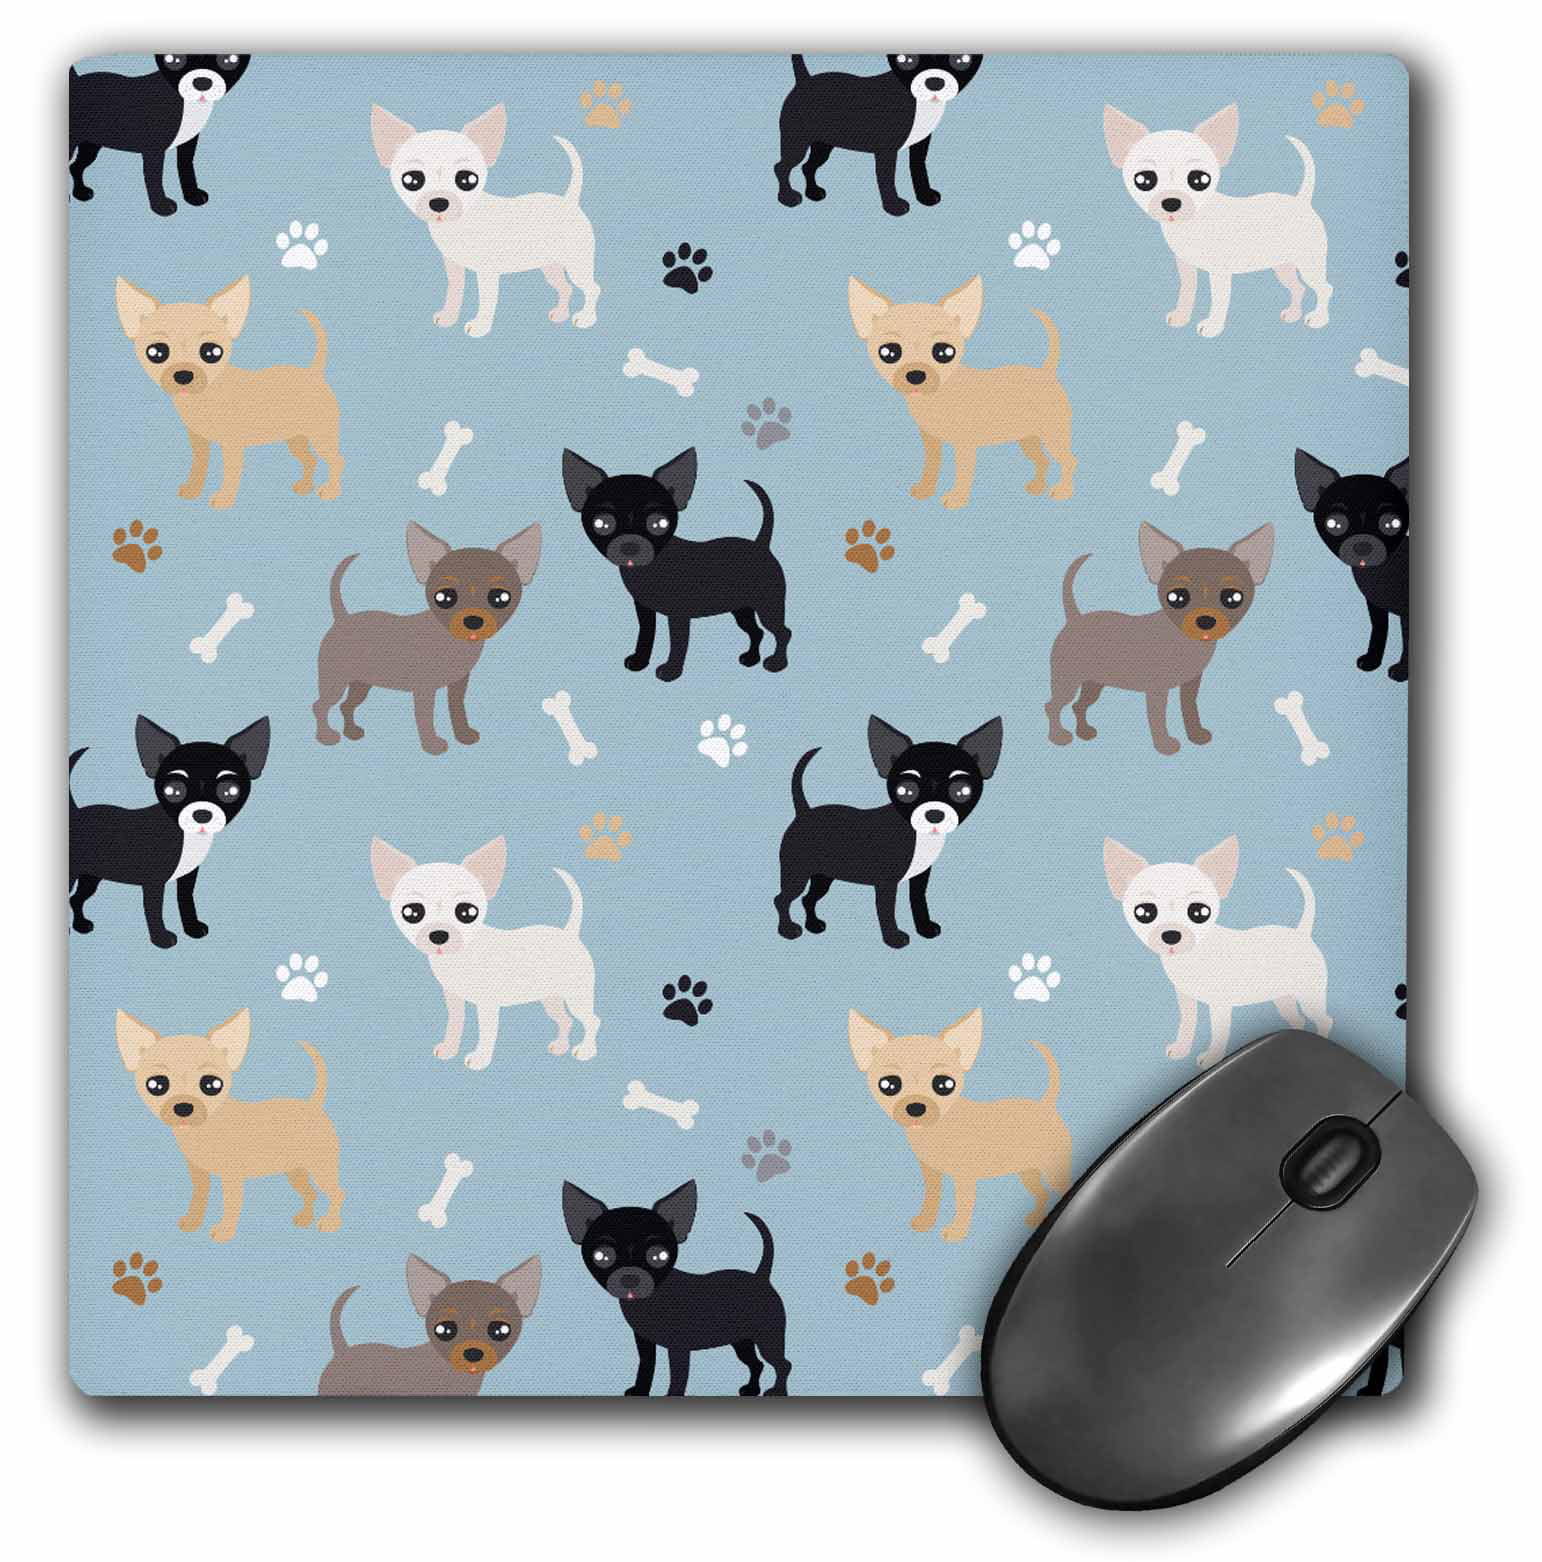 Laptop Computer Unique Pattern Optical Mice Mobile Wireless Mouse 2.4G Portable for Notebook Corgi Dogs Pattern PC